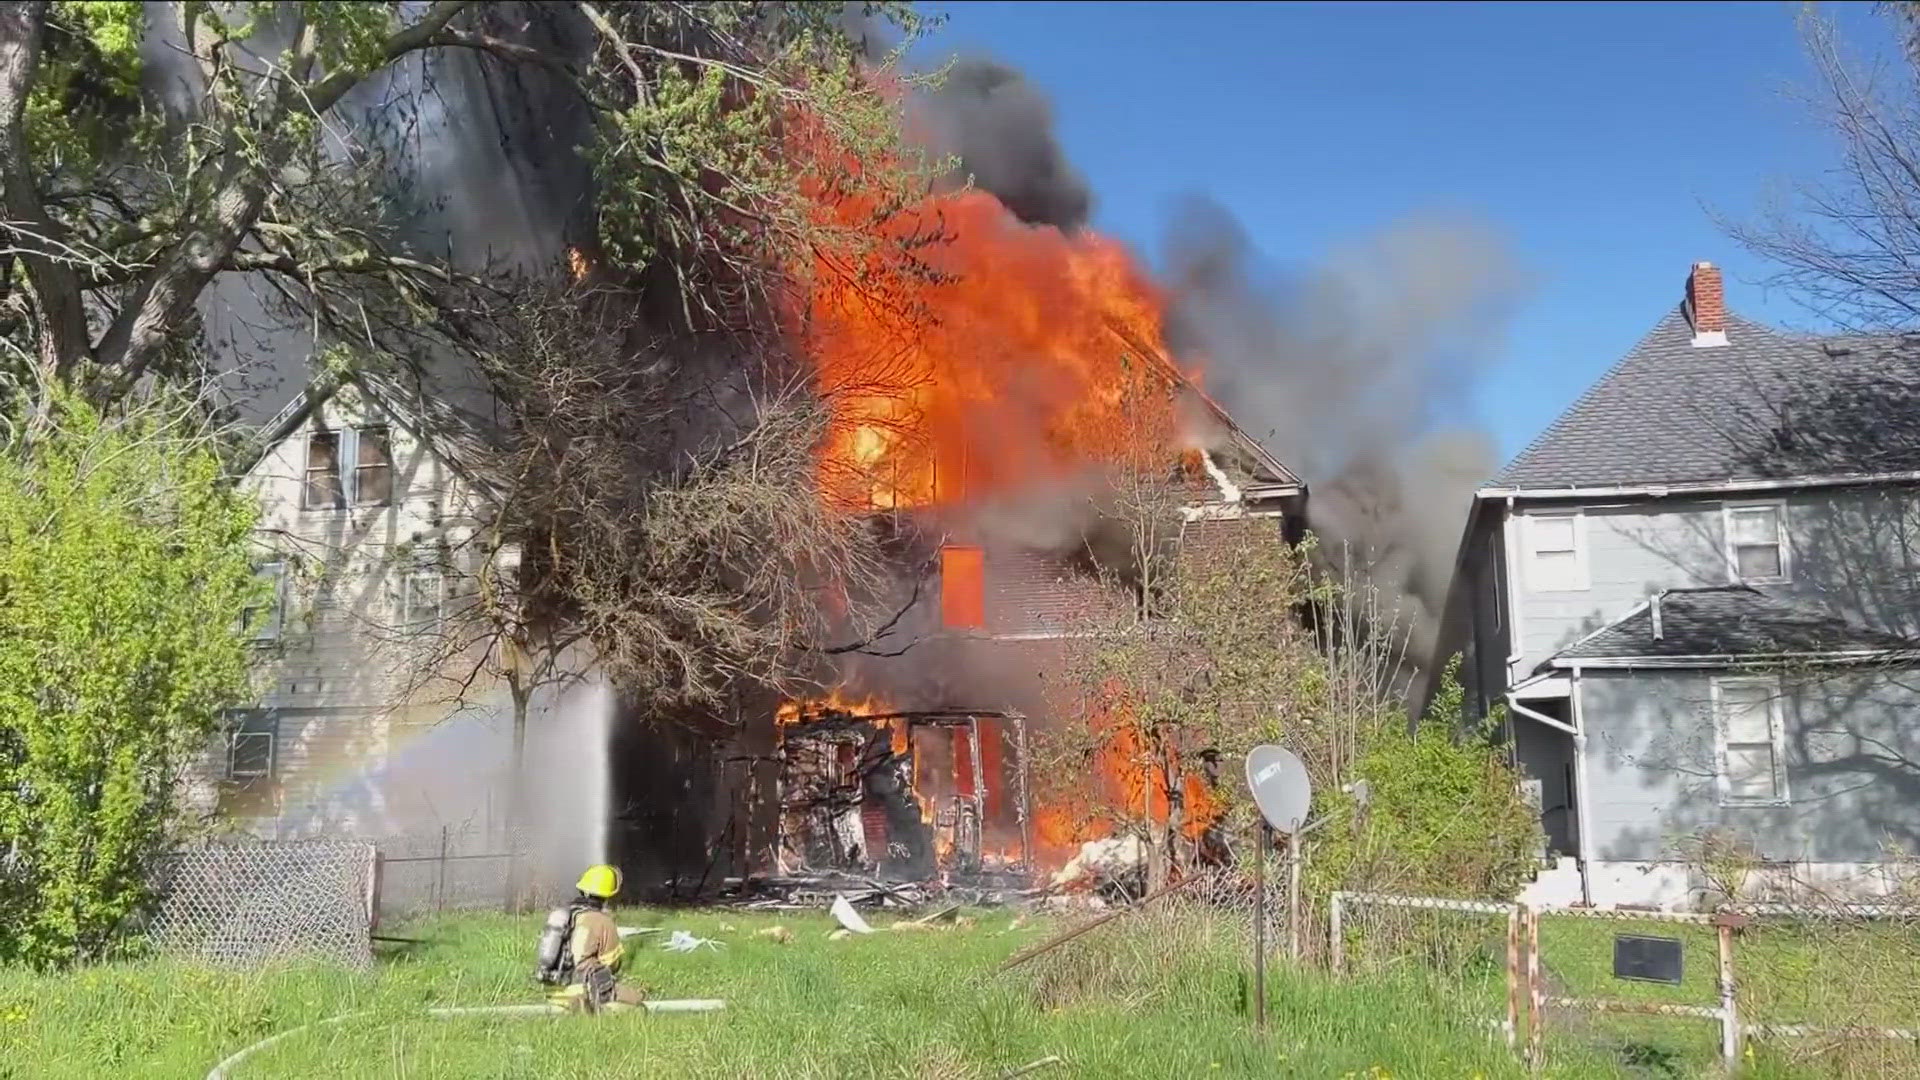 Police are investigating if a plumber's error led to a gas explosion and inferno.